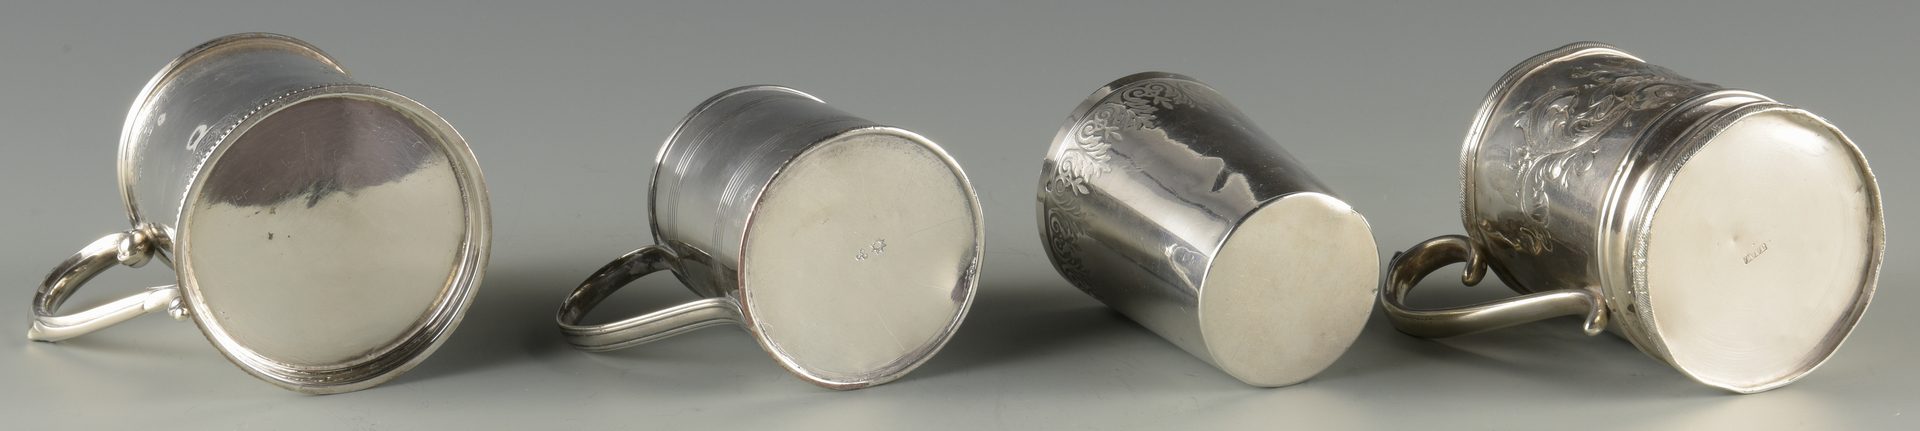 Lot 897: 4 Cups inc. Coin, Sterling, French